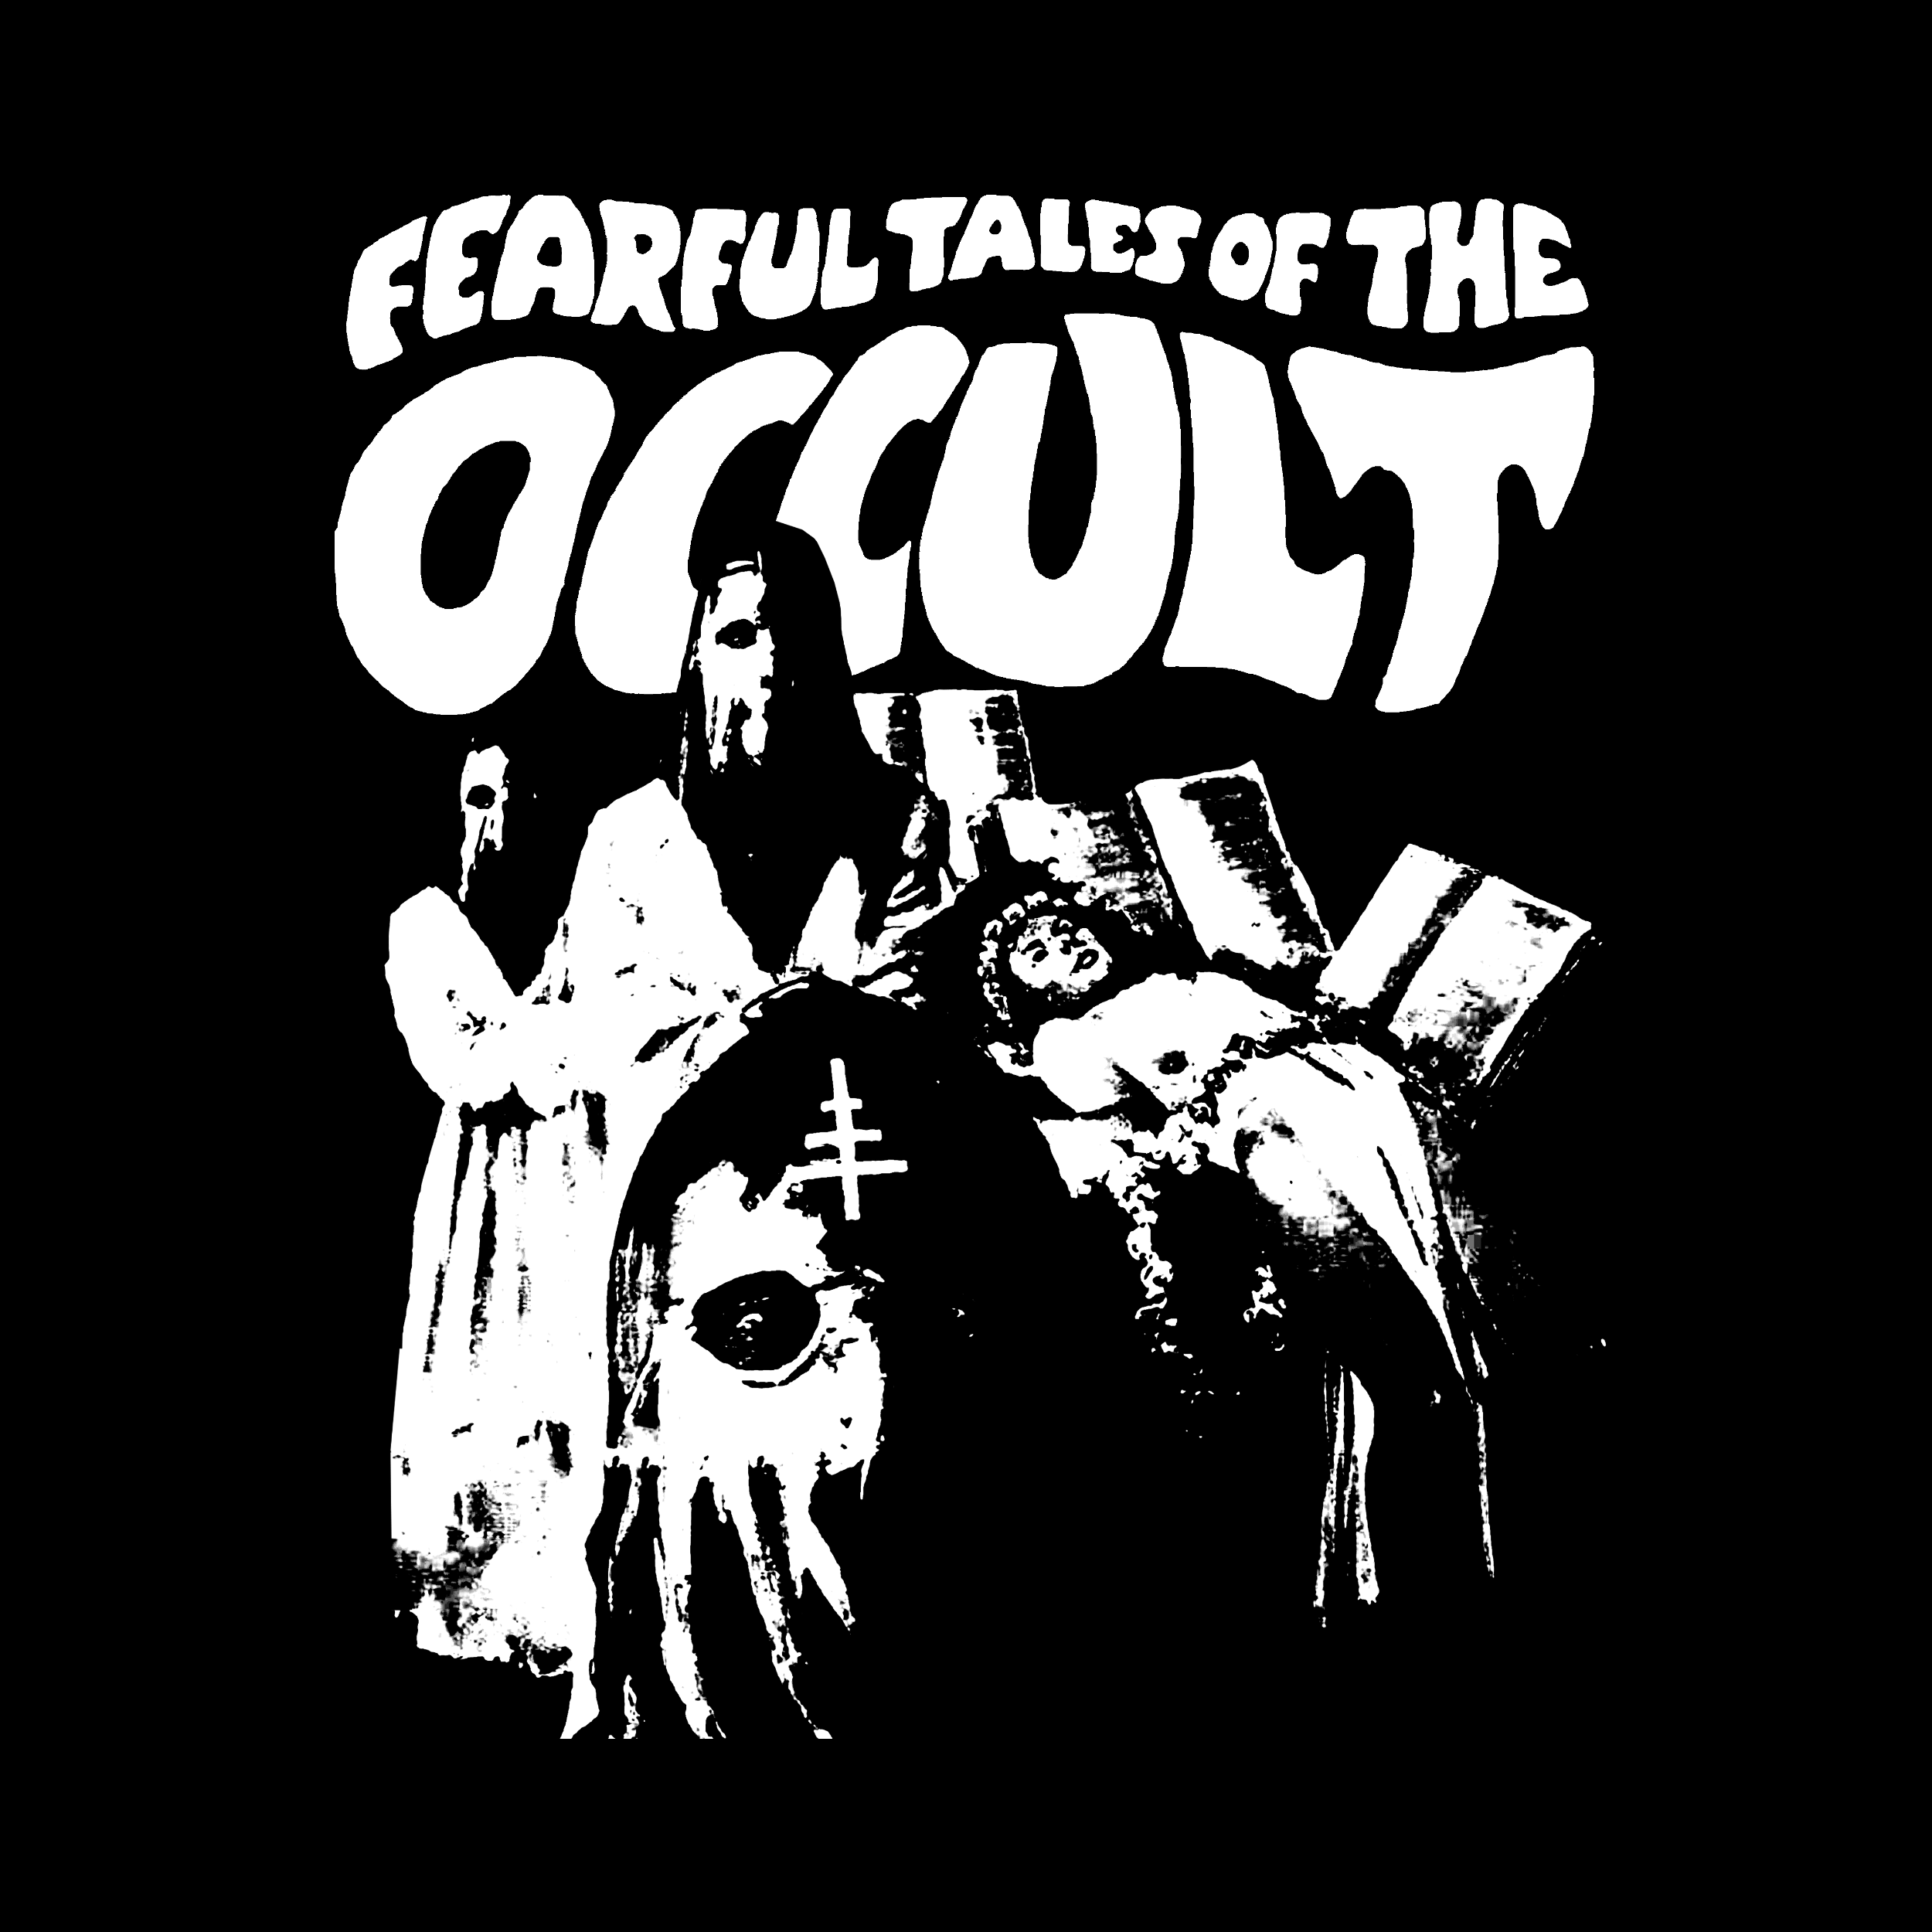 Fearful Tales Of The Occult Premium Tee